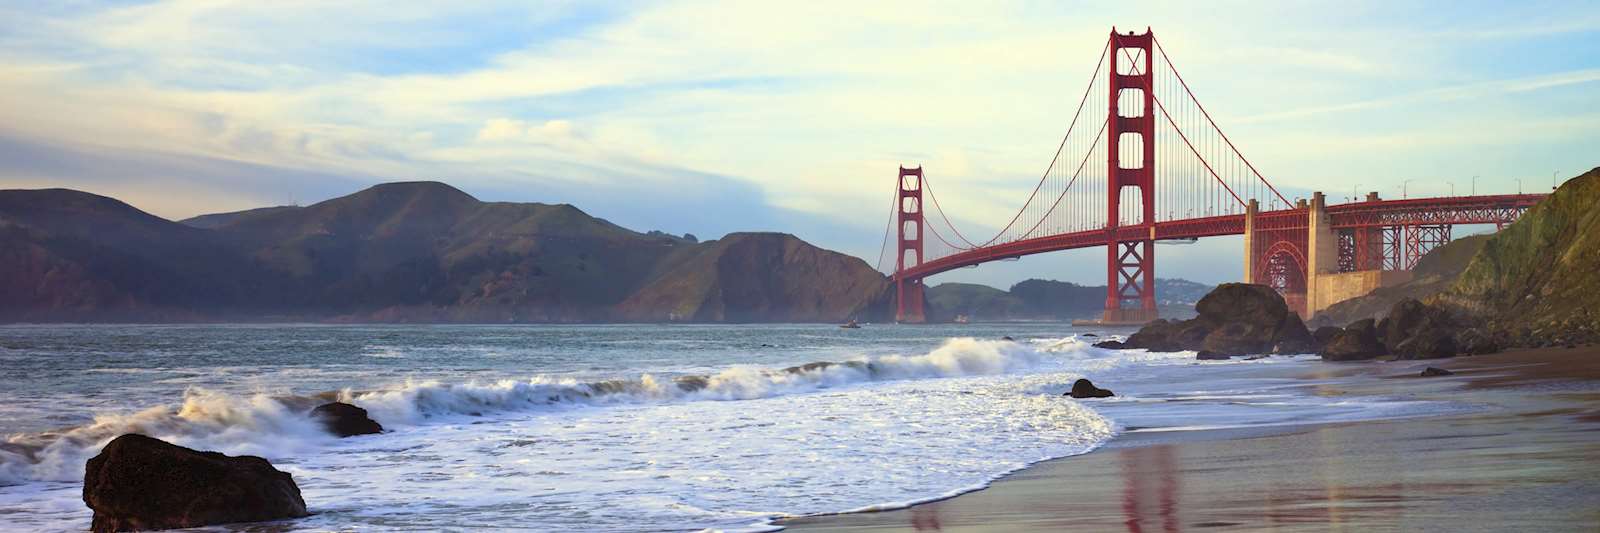 Self-drive holidays in California | Audley Travel UK